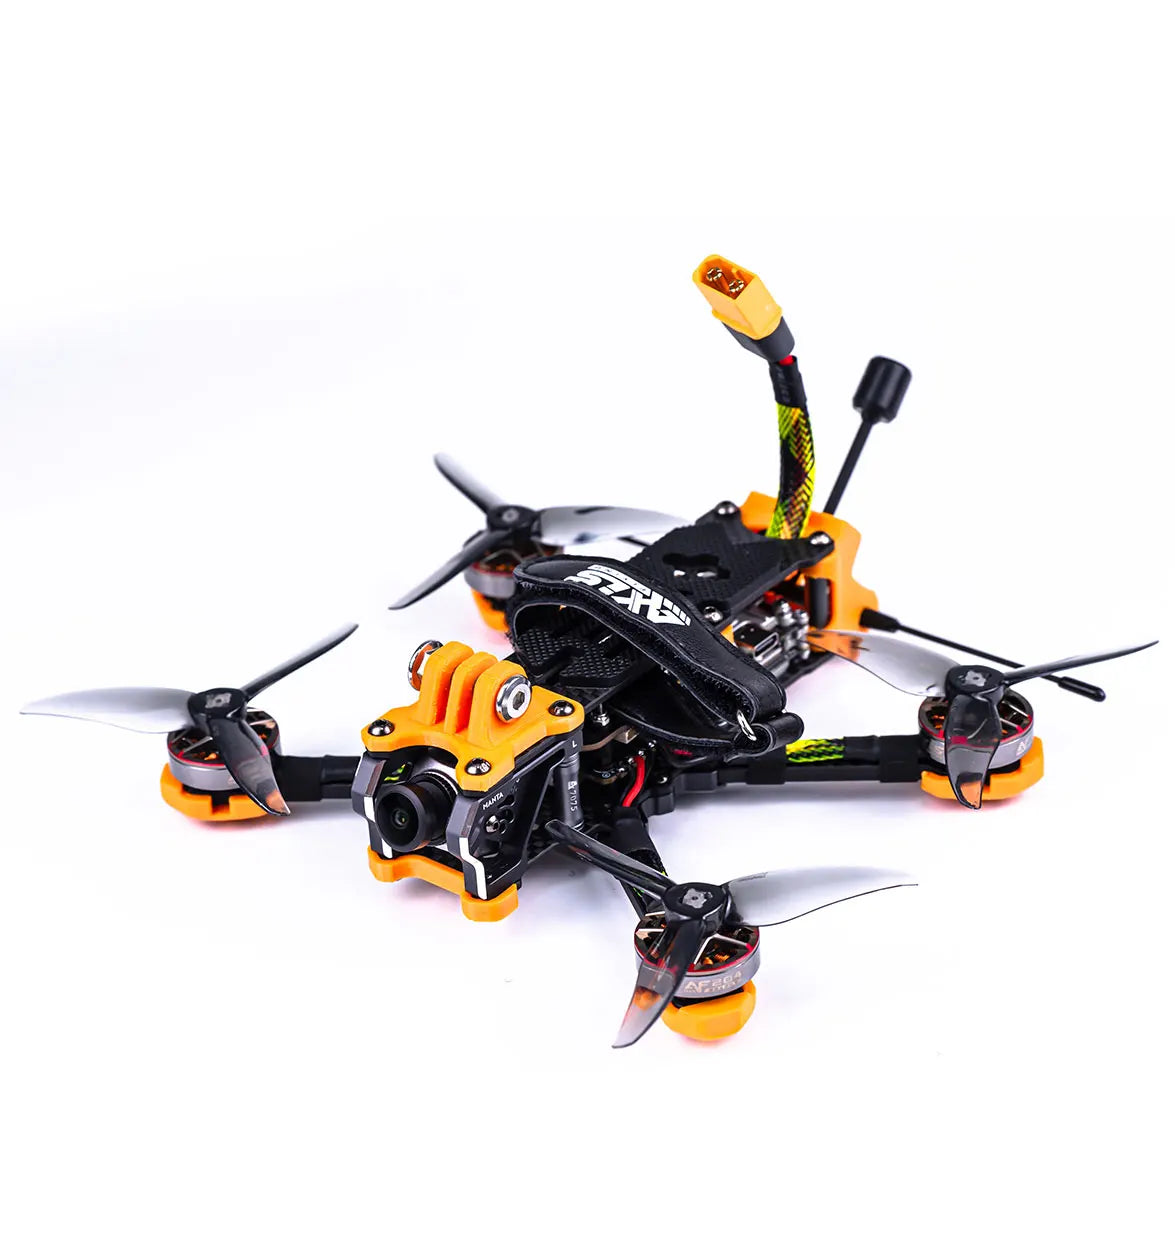 Axisflying MANTA3.5", If activation is not required, please note when placing an order